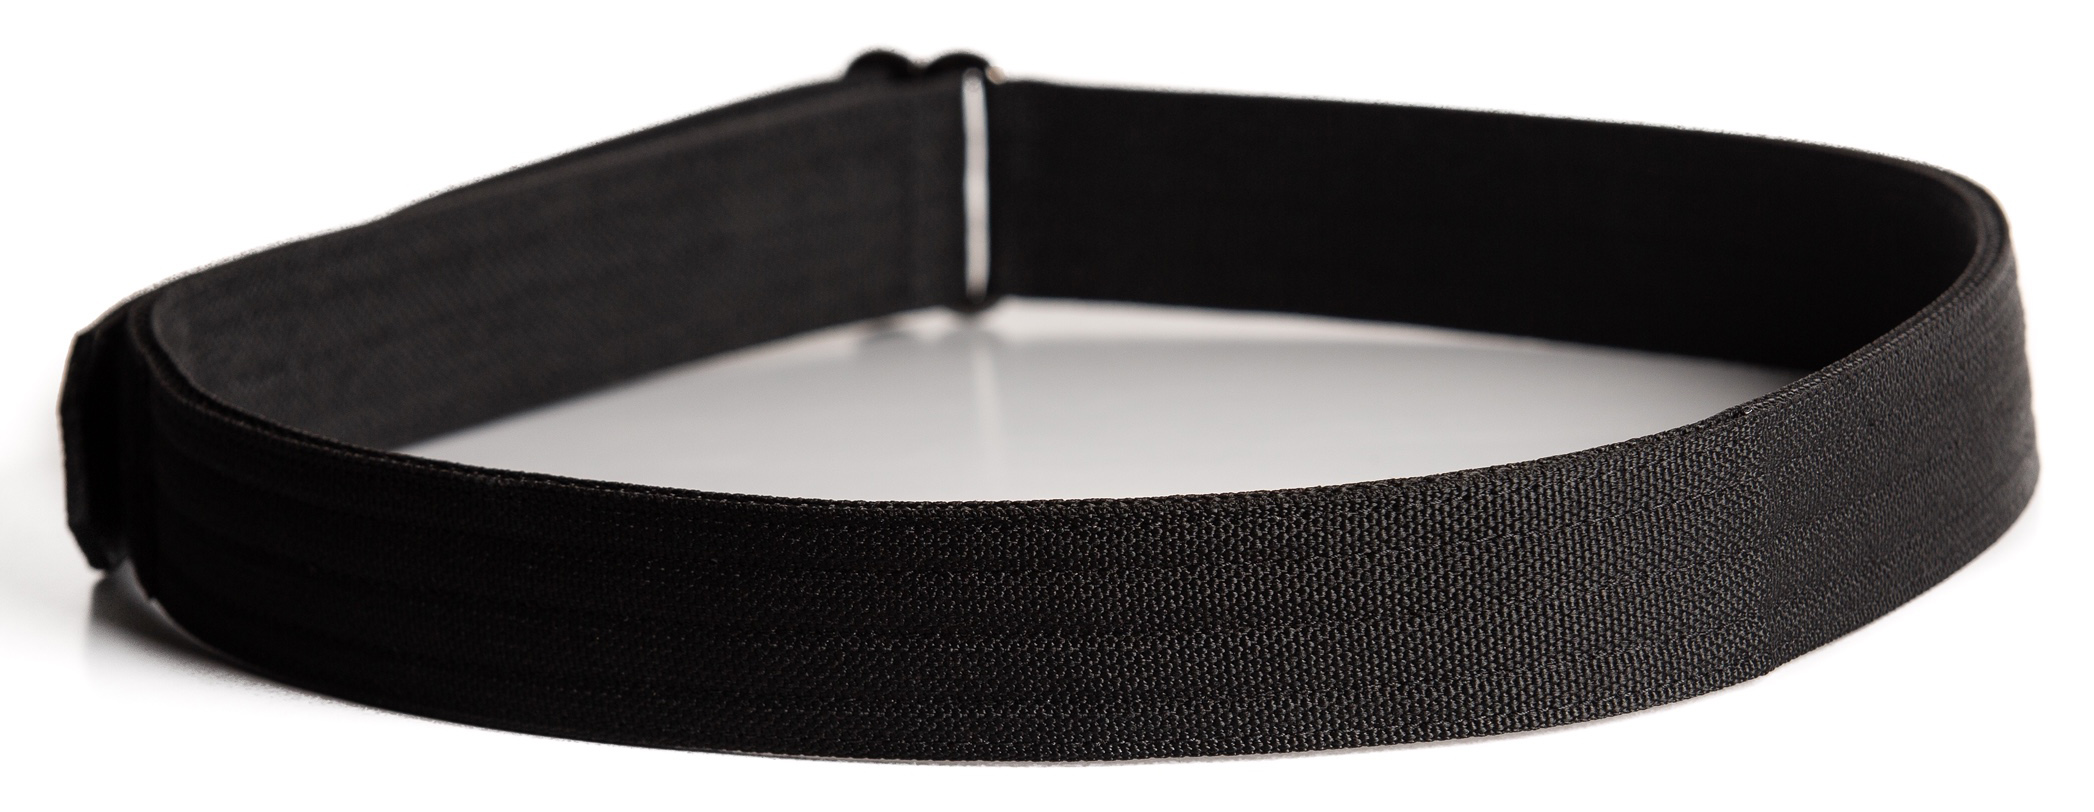 Best Concealed Carry Belts for Appendix Carry